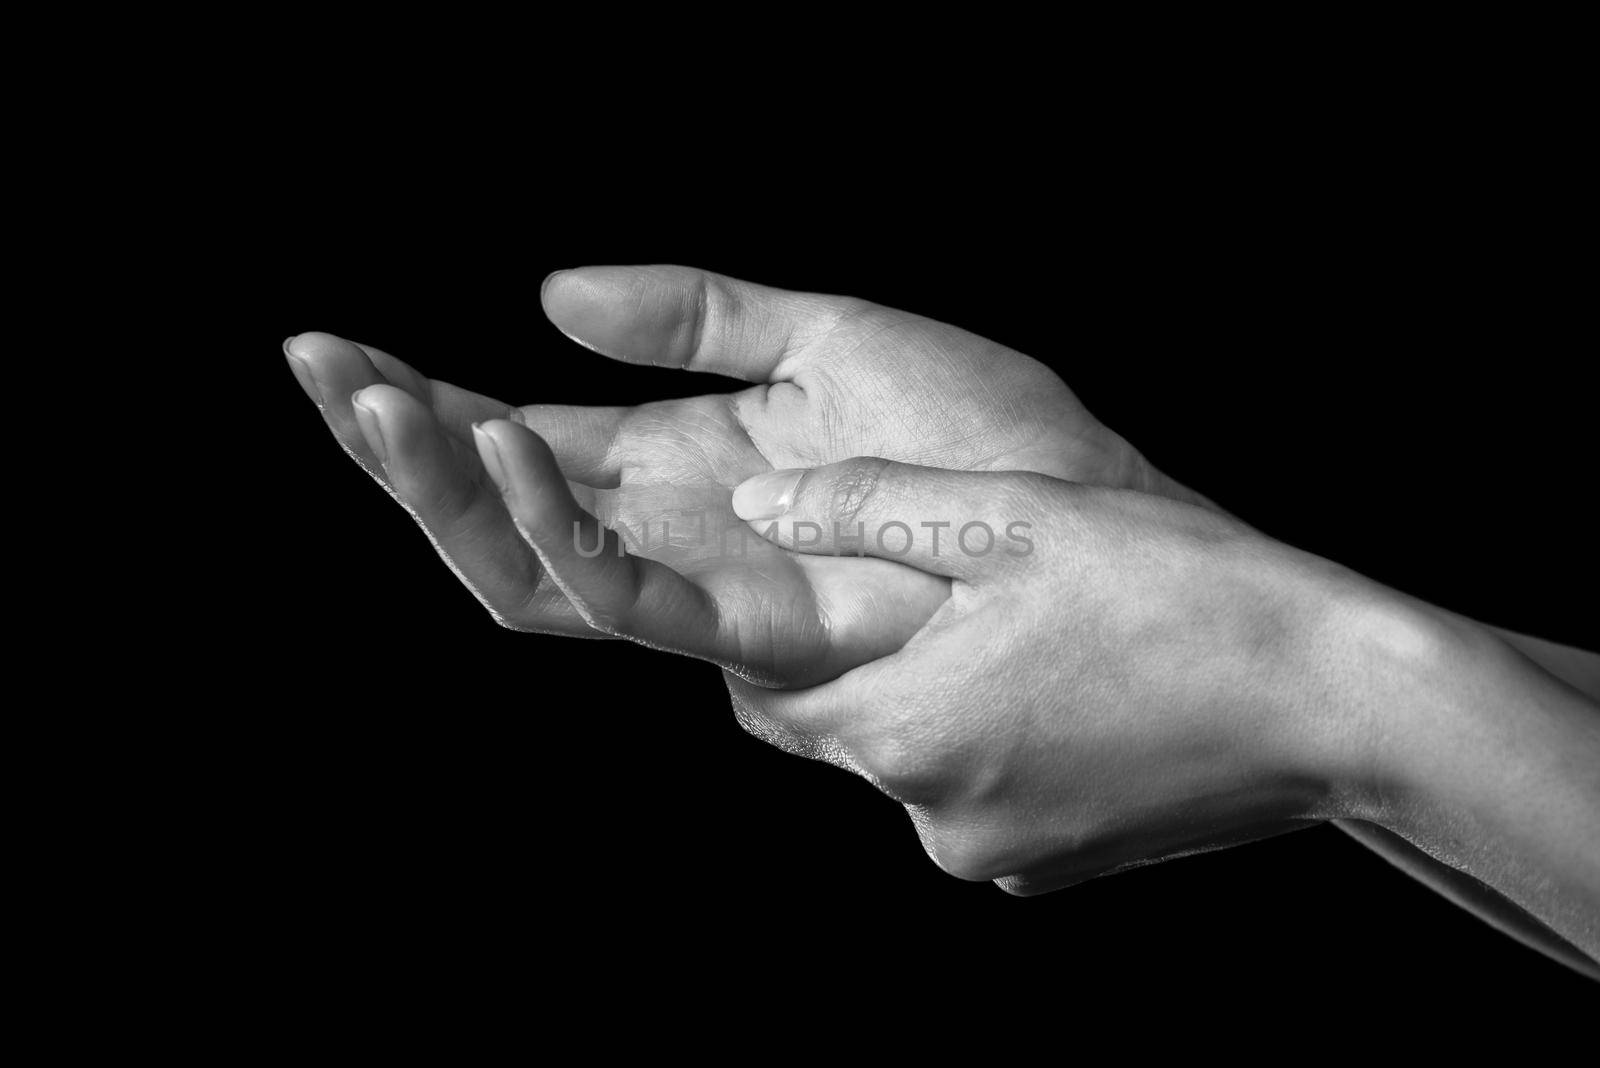 Woman holds her hand, pain in the wrist, black and white image